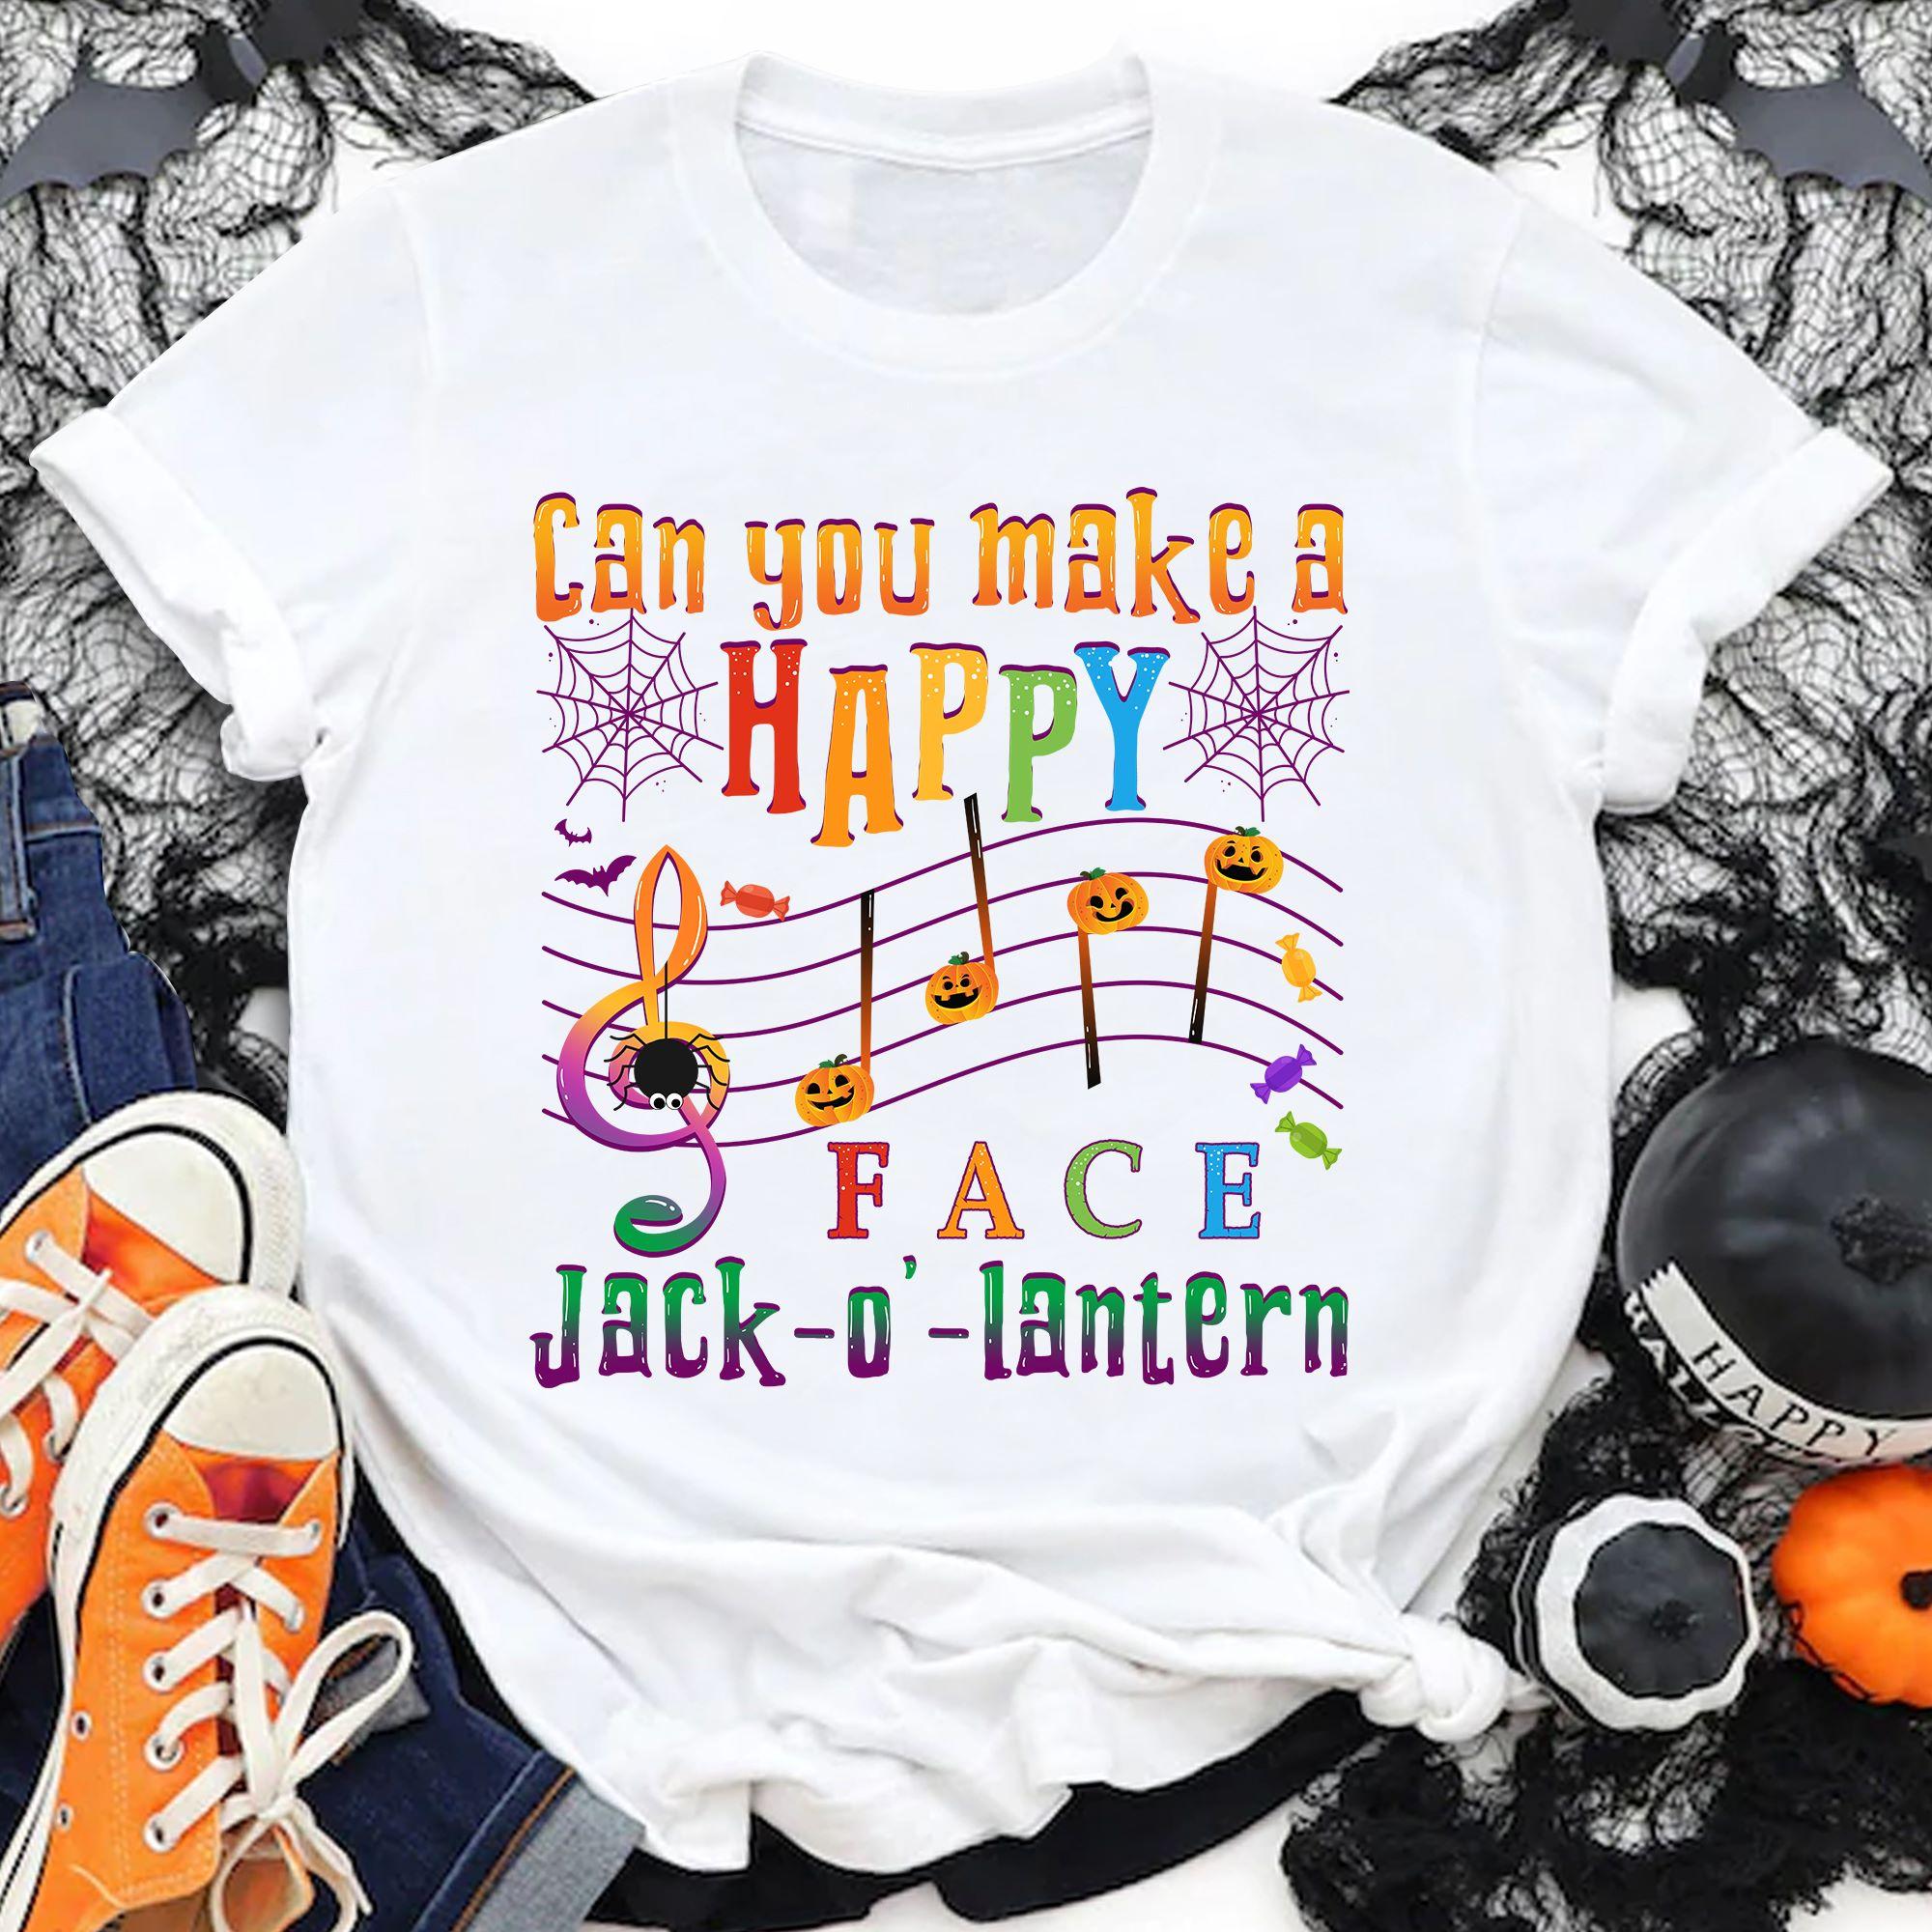 Can you make a happy face - Jack o' lantern, Halloween music lover